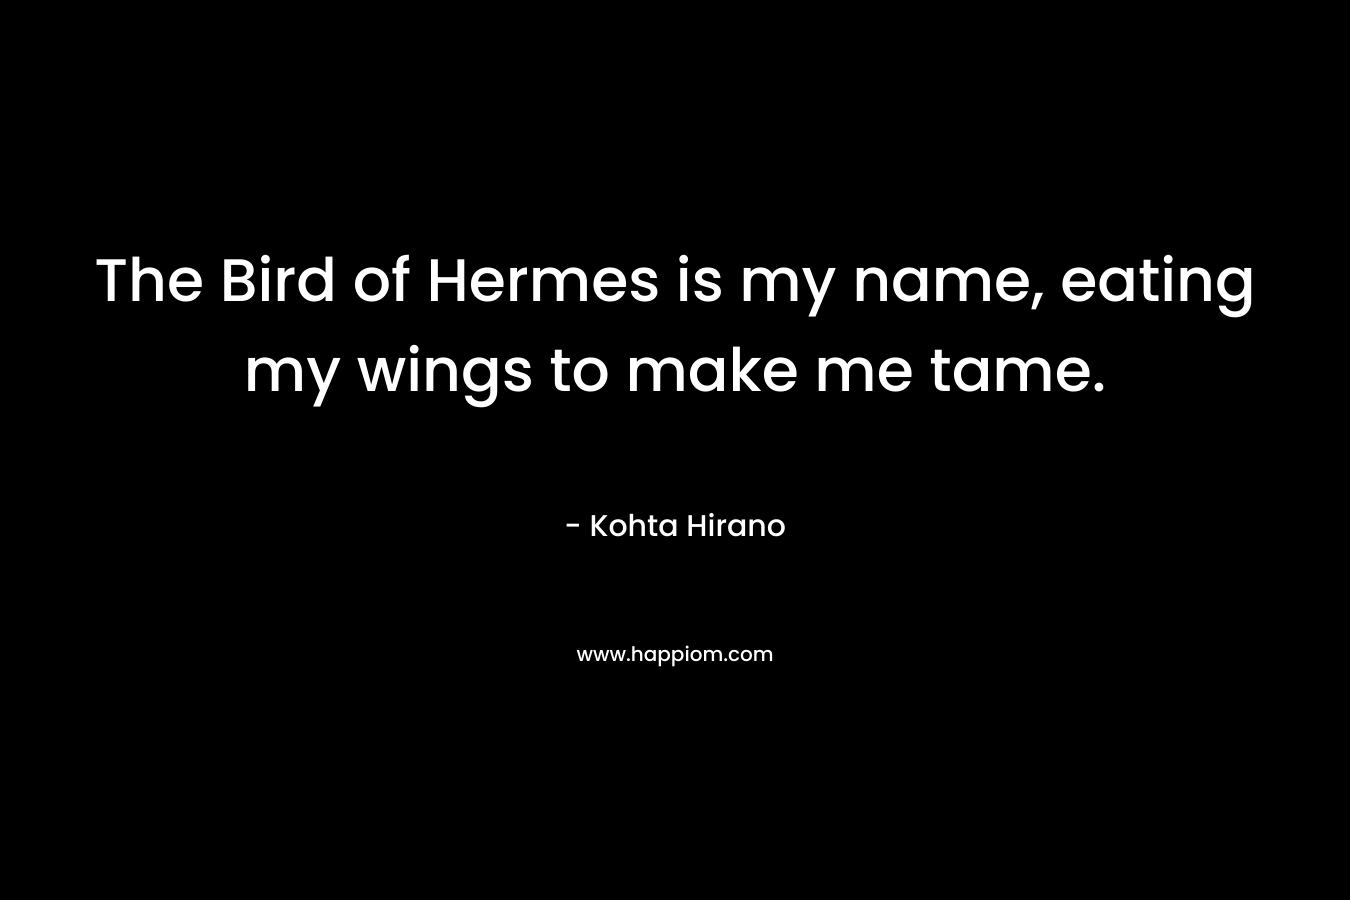 The Bird of Hermes is my name, eating my wings to make me tame. – Kohta Hirano